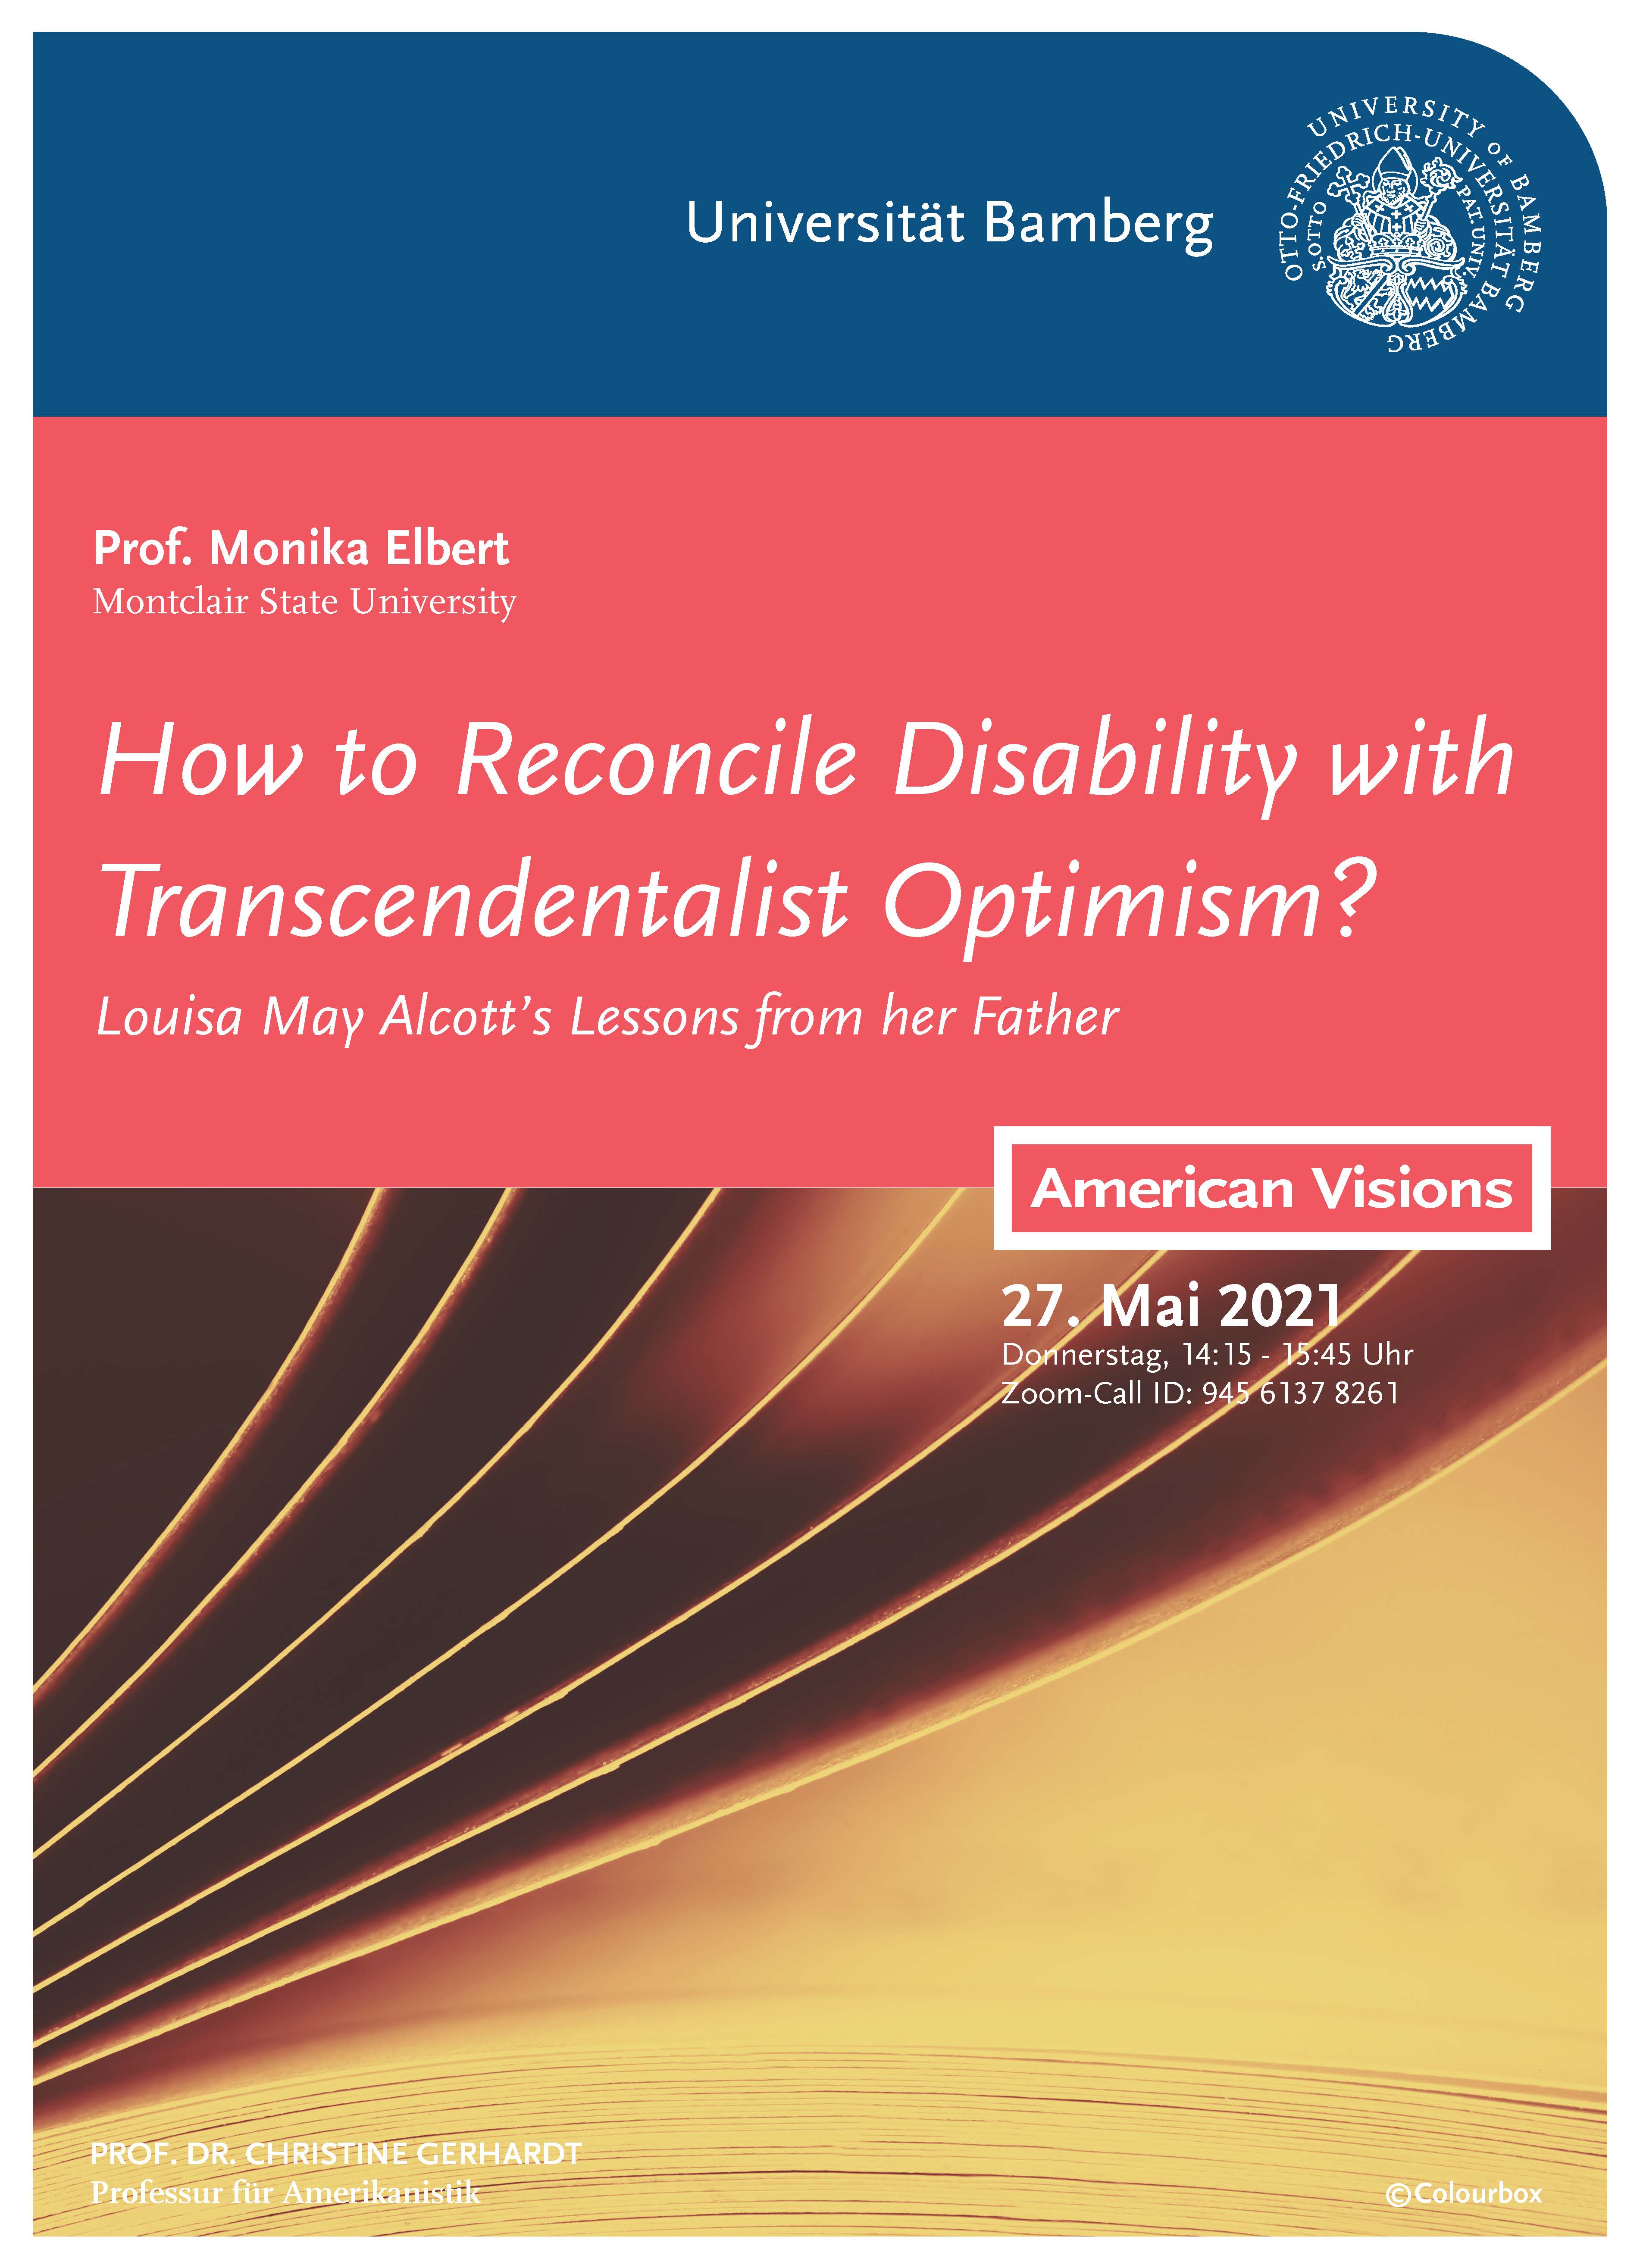 How to Reconcile Disability with Transcendentalist Louisa May Alcott's Lessons from her Father" - Professur für Amerikanistik